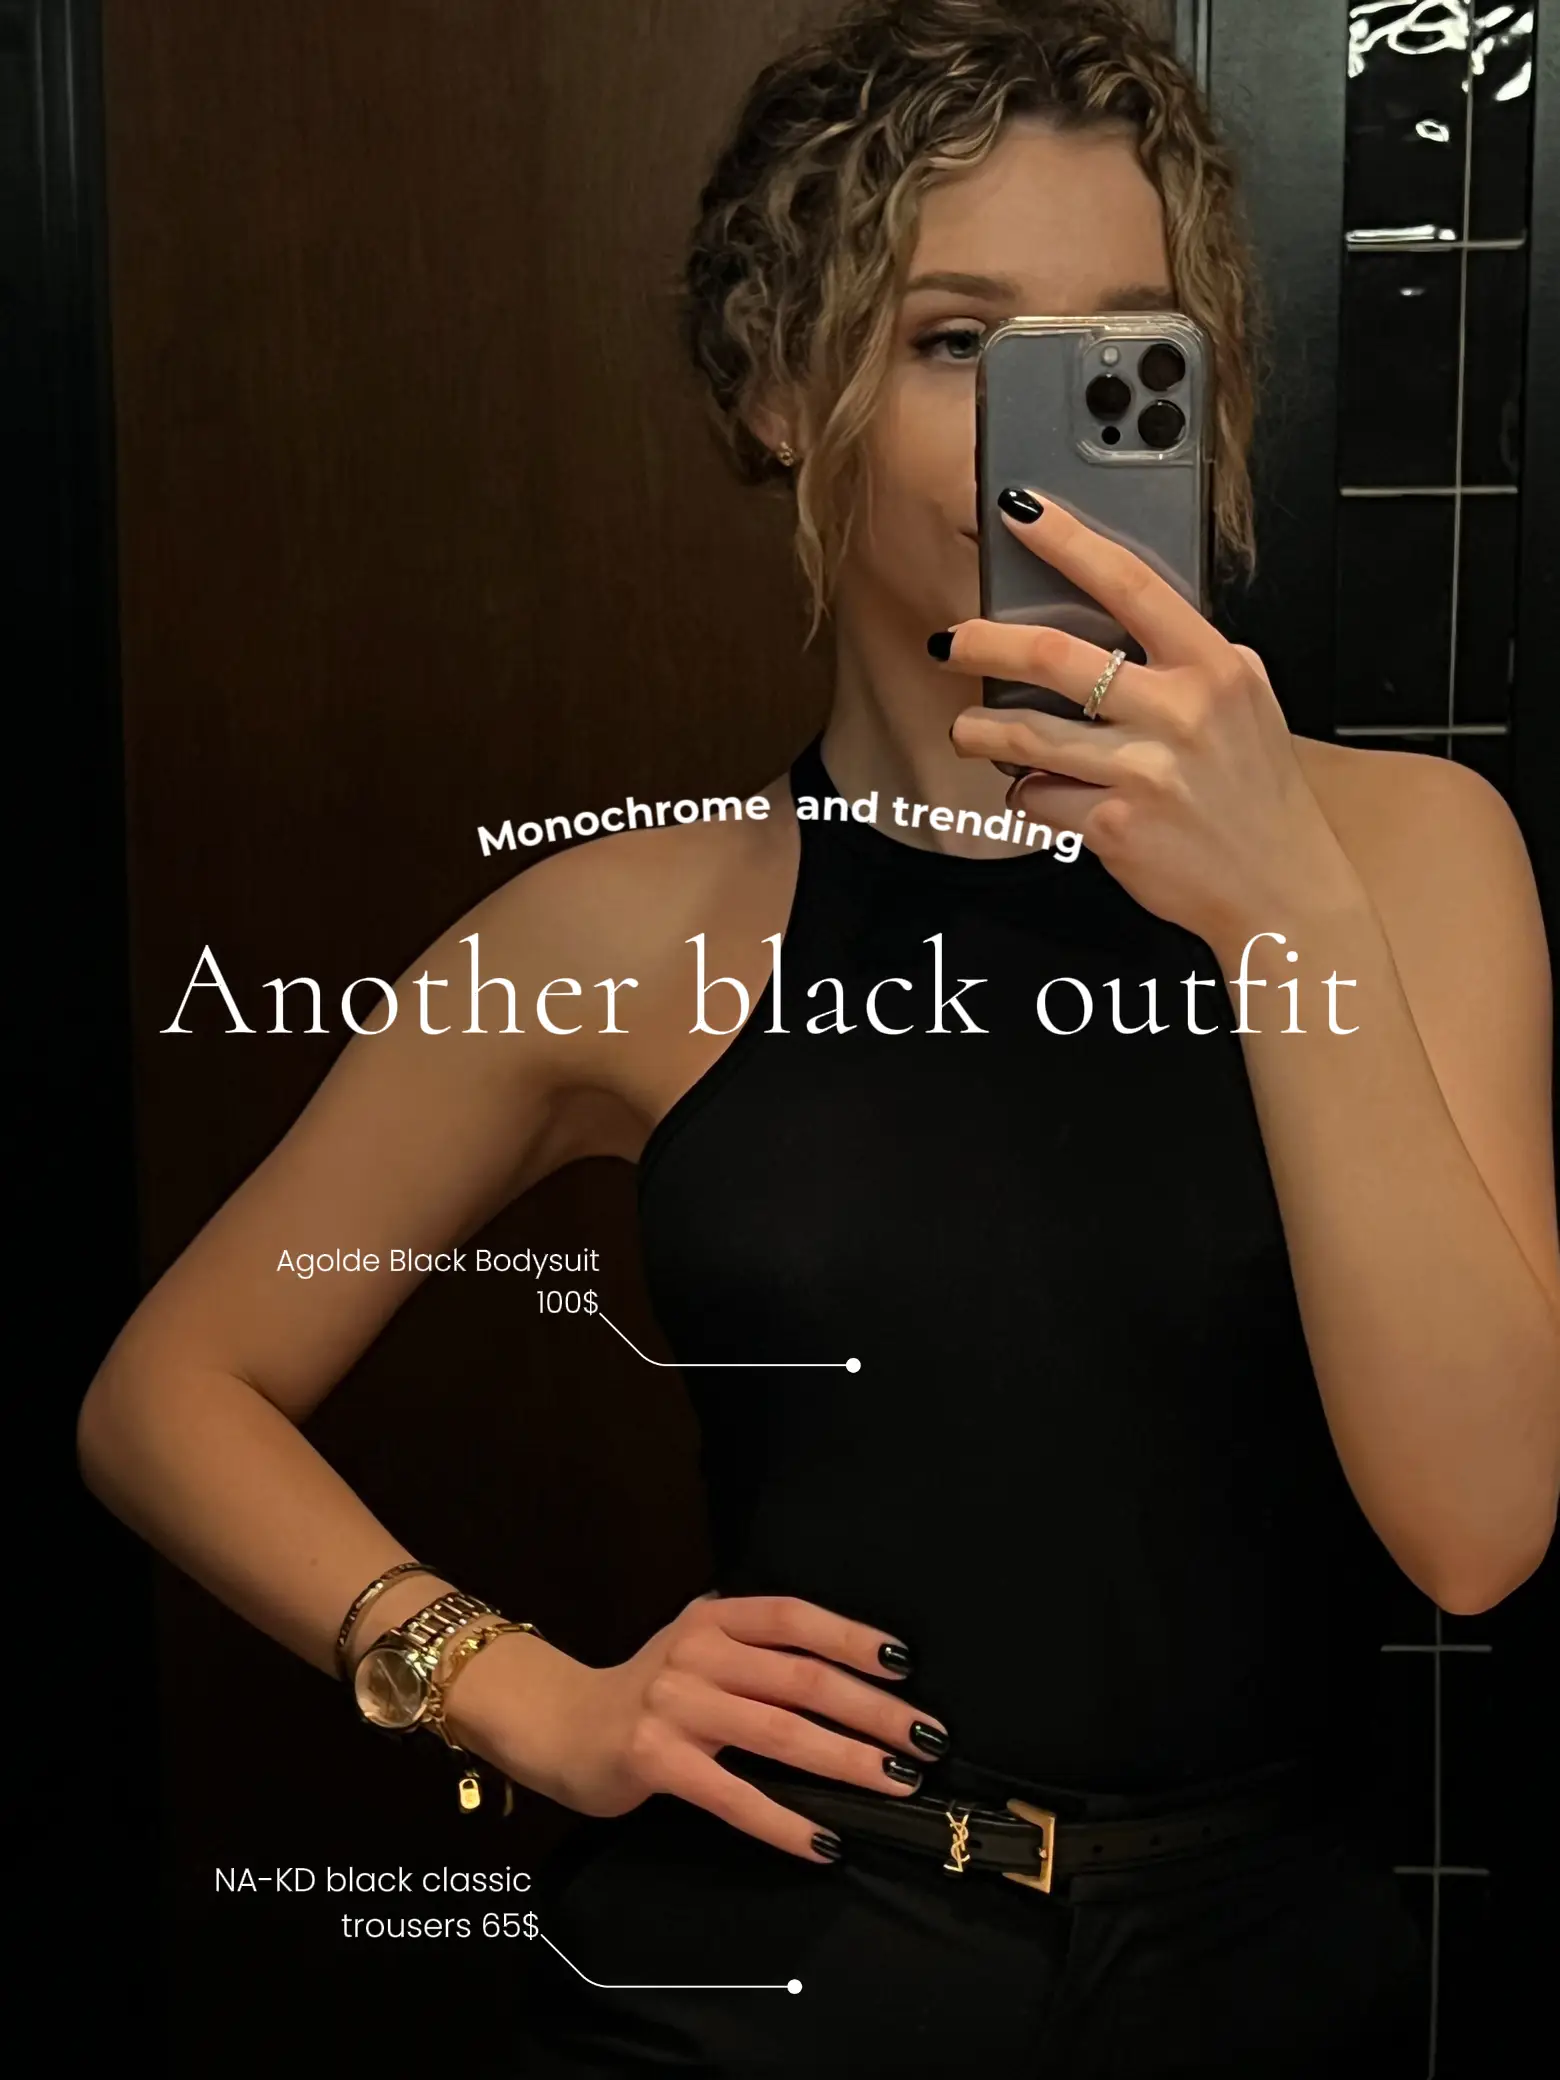 How To Style The Saint Laurent Logo Buckle Belt - Sassy In The City